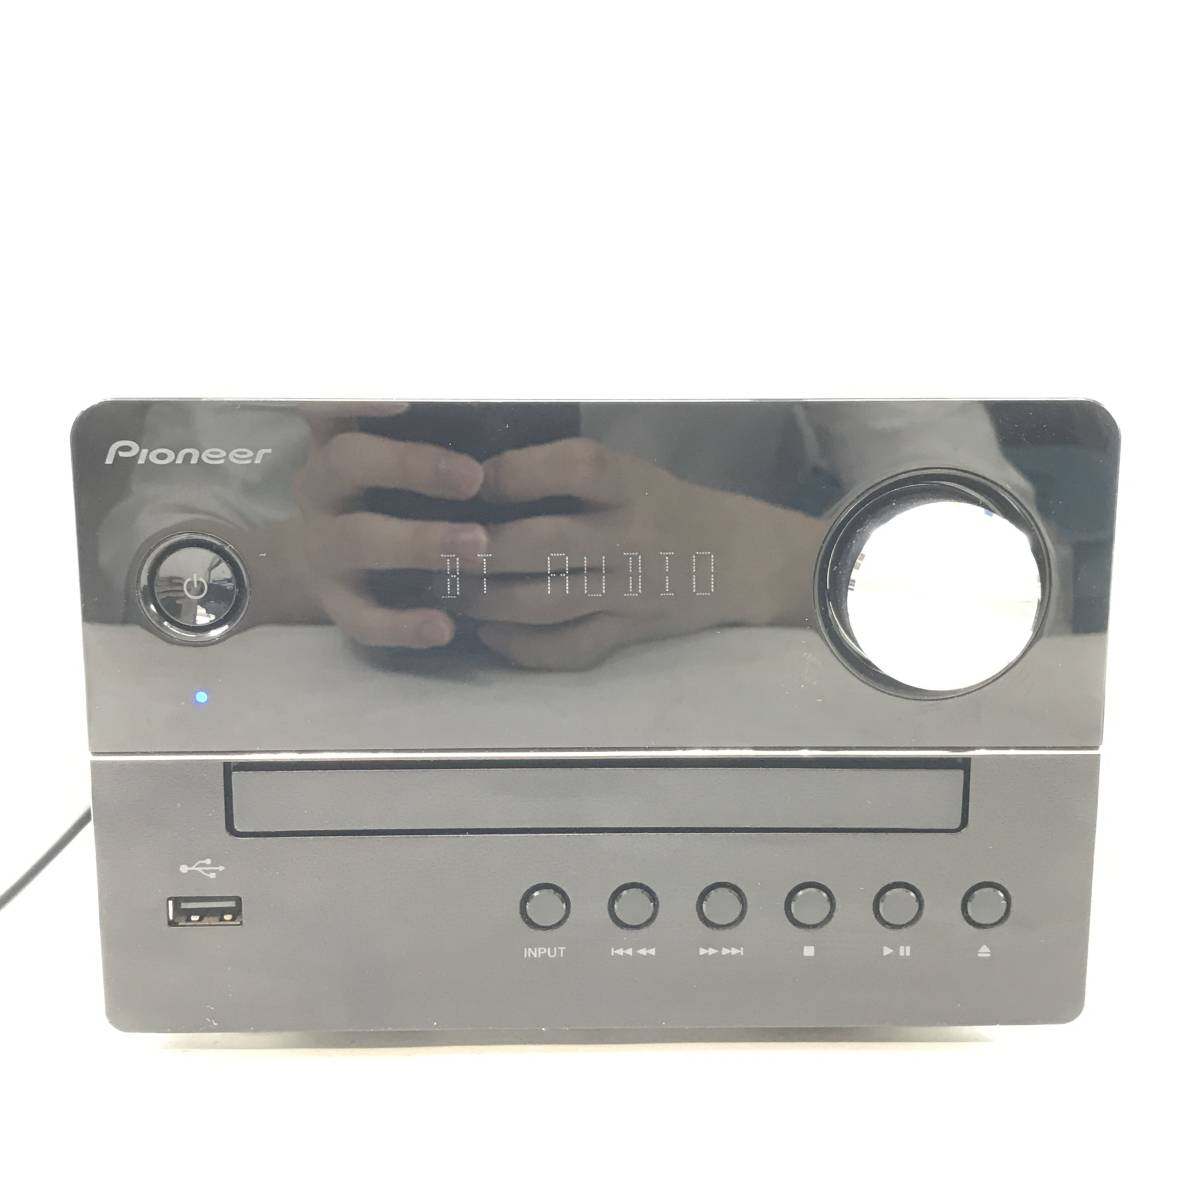 (17191)*pioneer CD MINI player nento system Pioneer X-EM26 2017 year made Bluetooth CD USB AUX black operation verification ending secondhand goods 